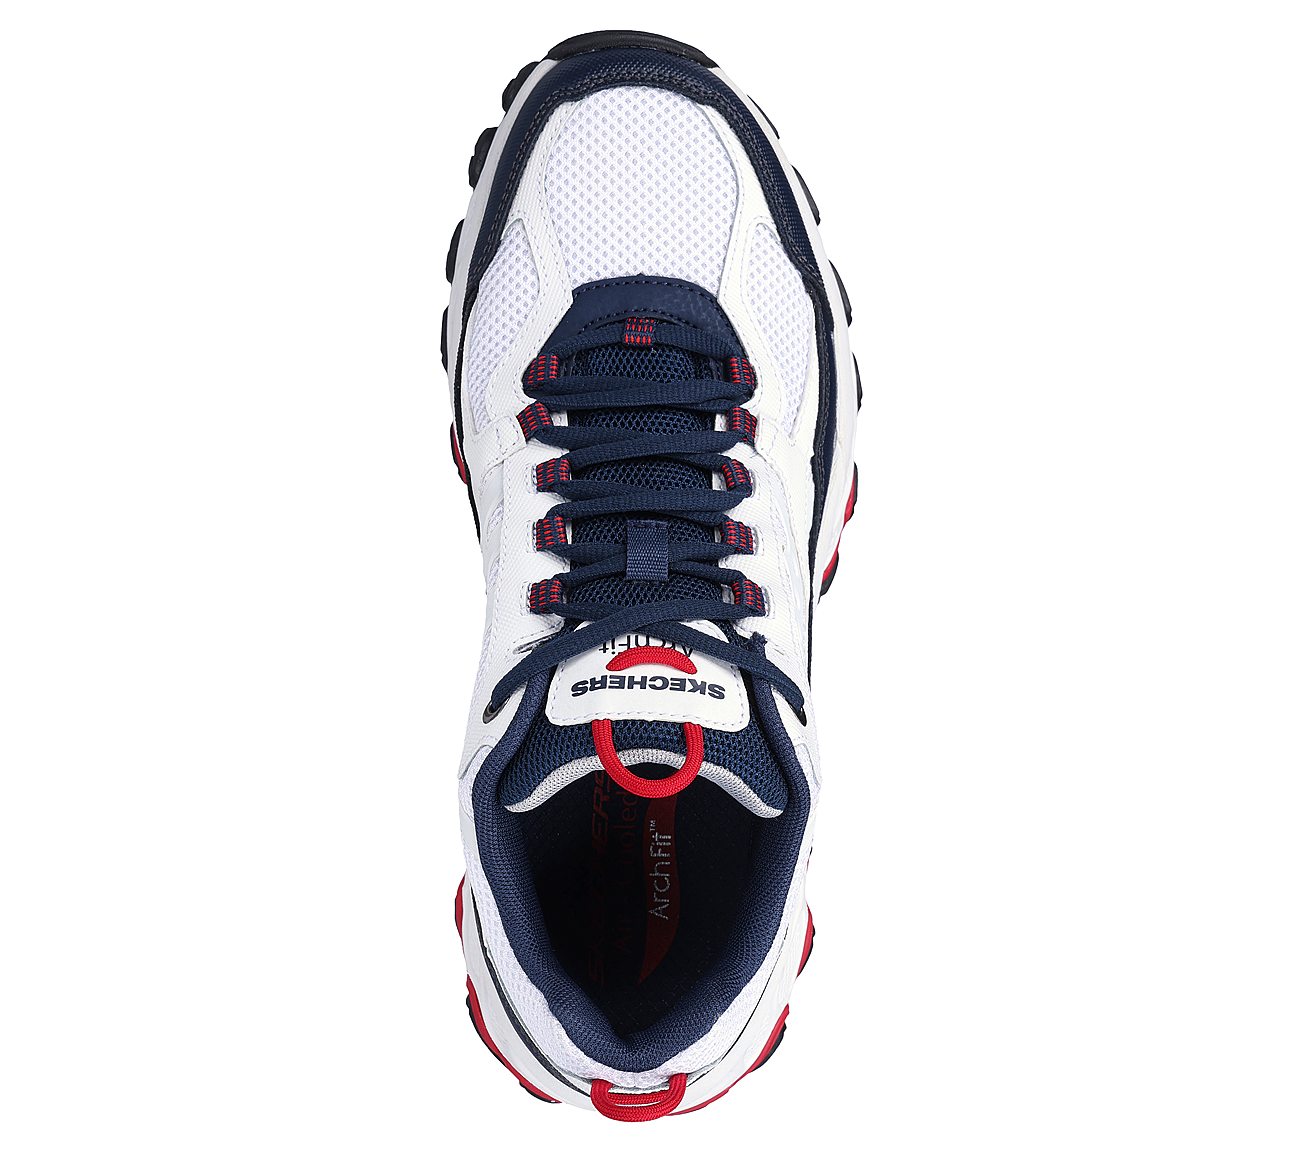 ARCH FIT AKHIDIME, WHITE/NAVY/RED Footwear Top View